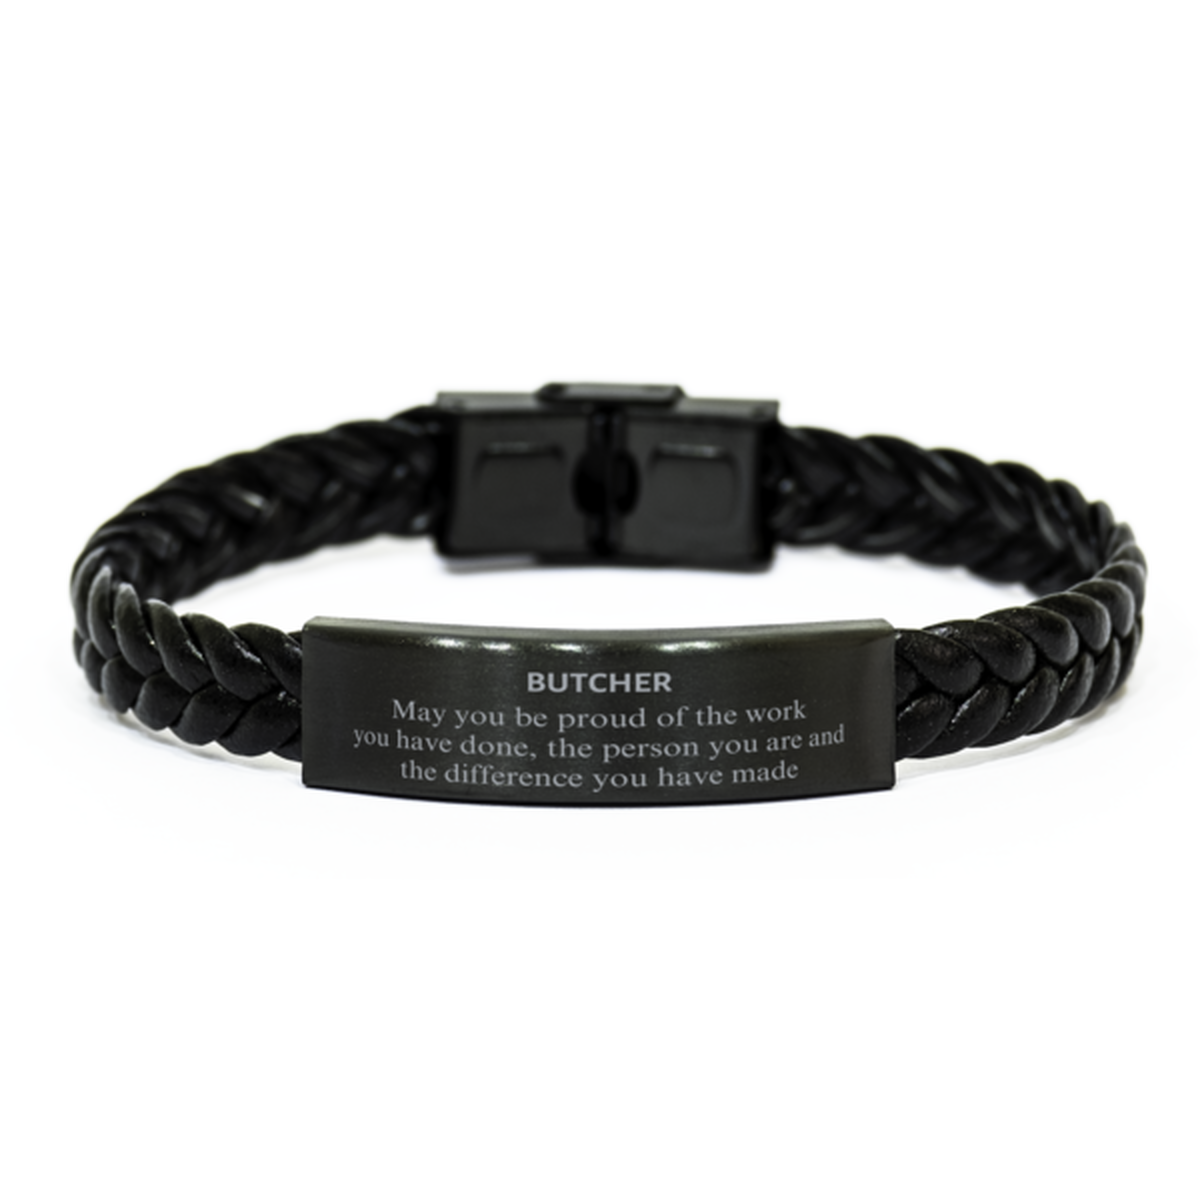 Butcher May you be proud of the work you have done, Retirement Butcher Braided Leather Bracelet for Colleague Appreciation Gifts Amazing for Butcher